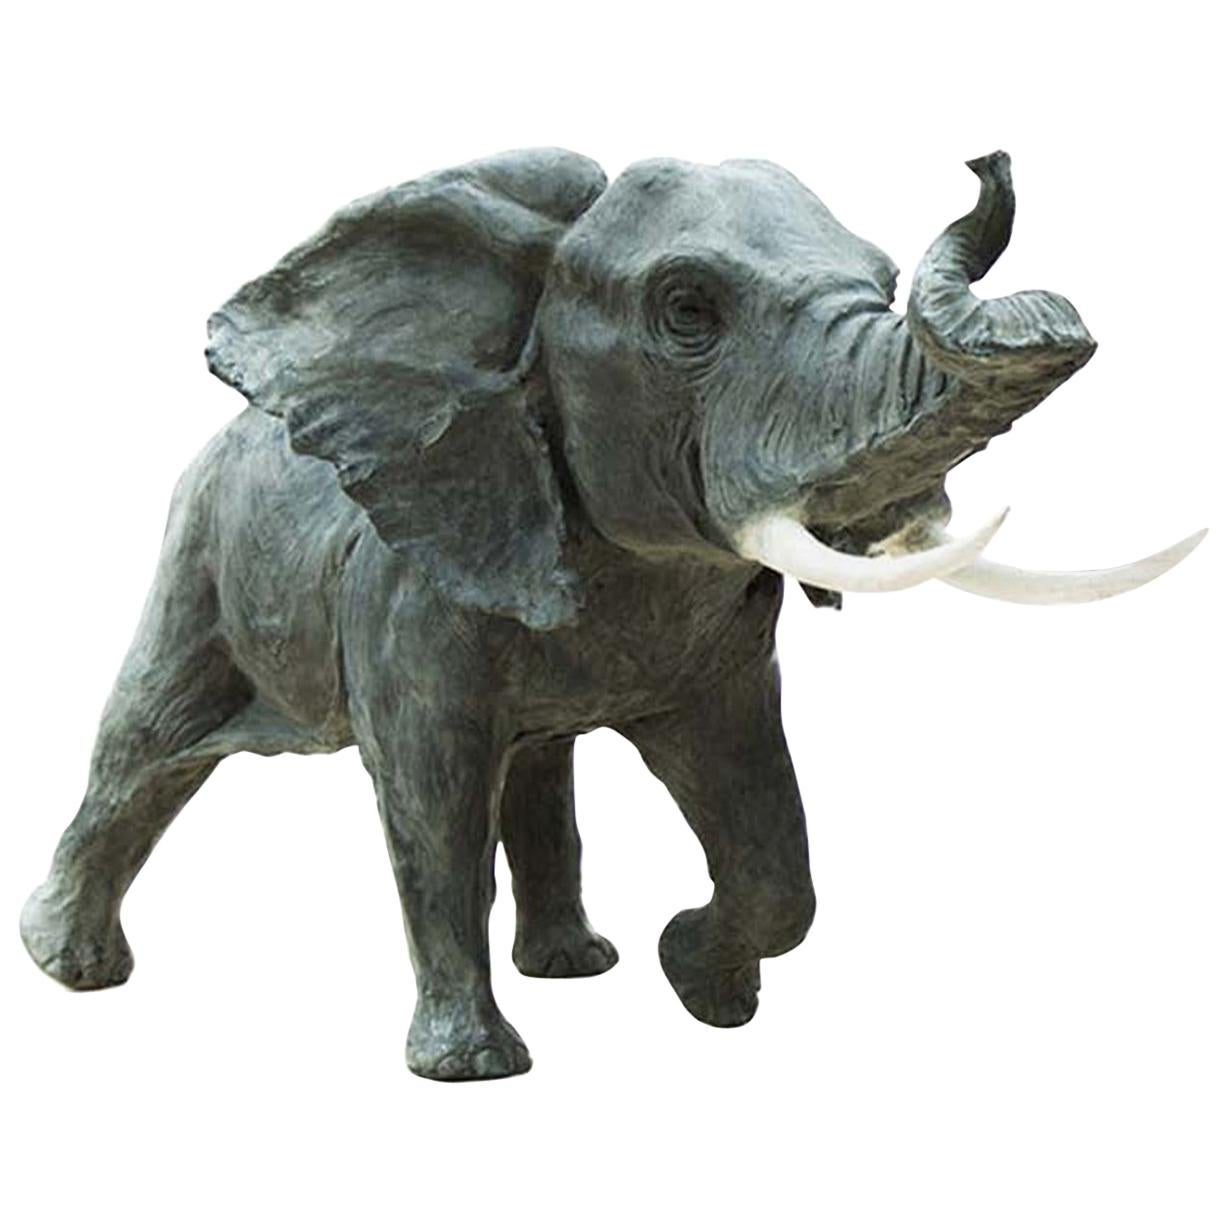 Large African Elephant Sculpture by Vincenzo Romanelli